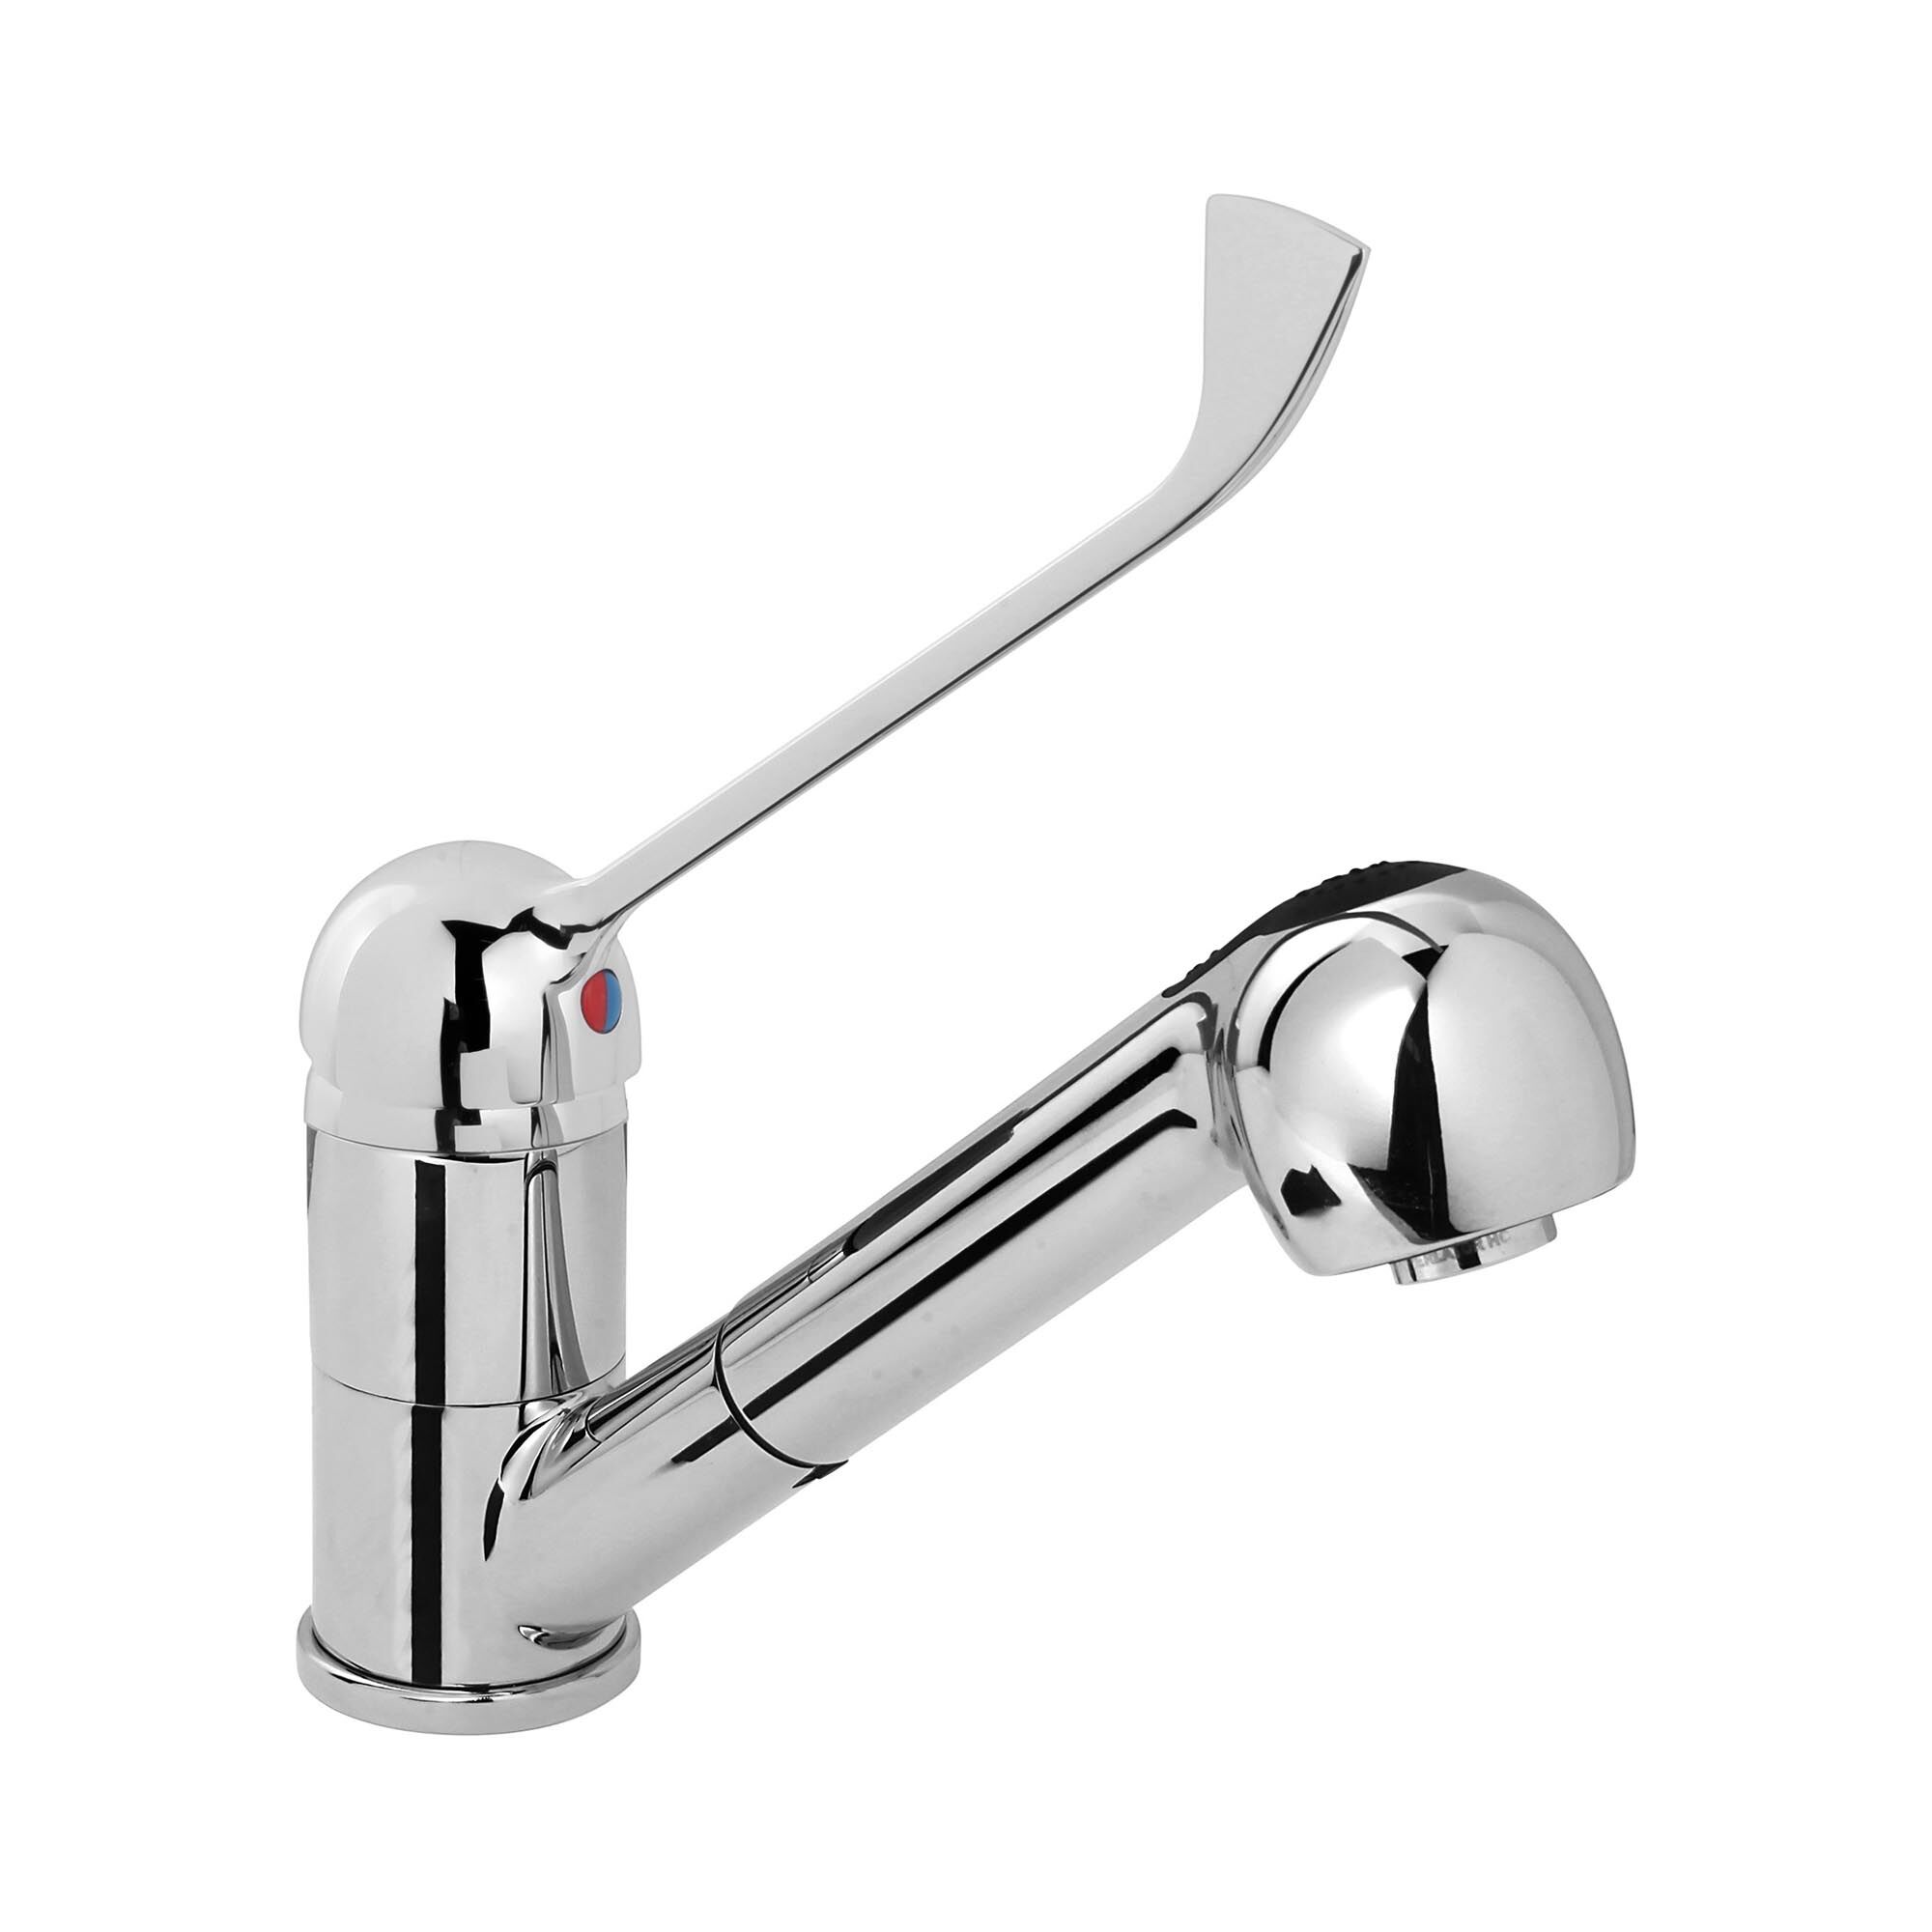 Monolith Kitchen Sink Mixer Tap - integrated hose - water tap 215 mm - chrome-plated brass